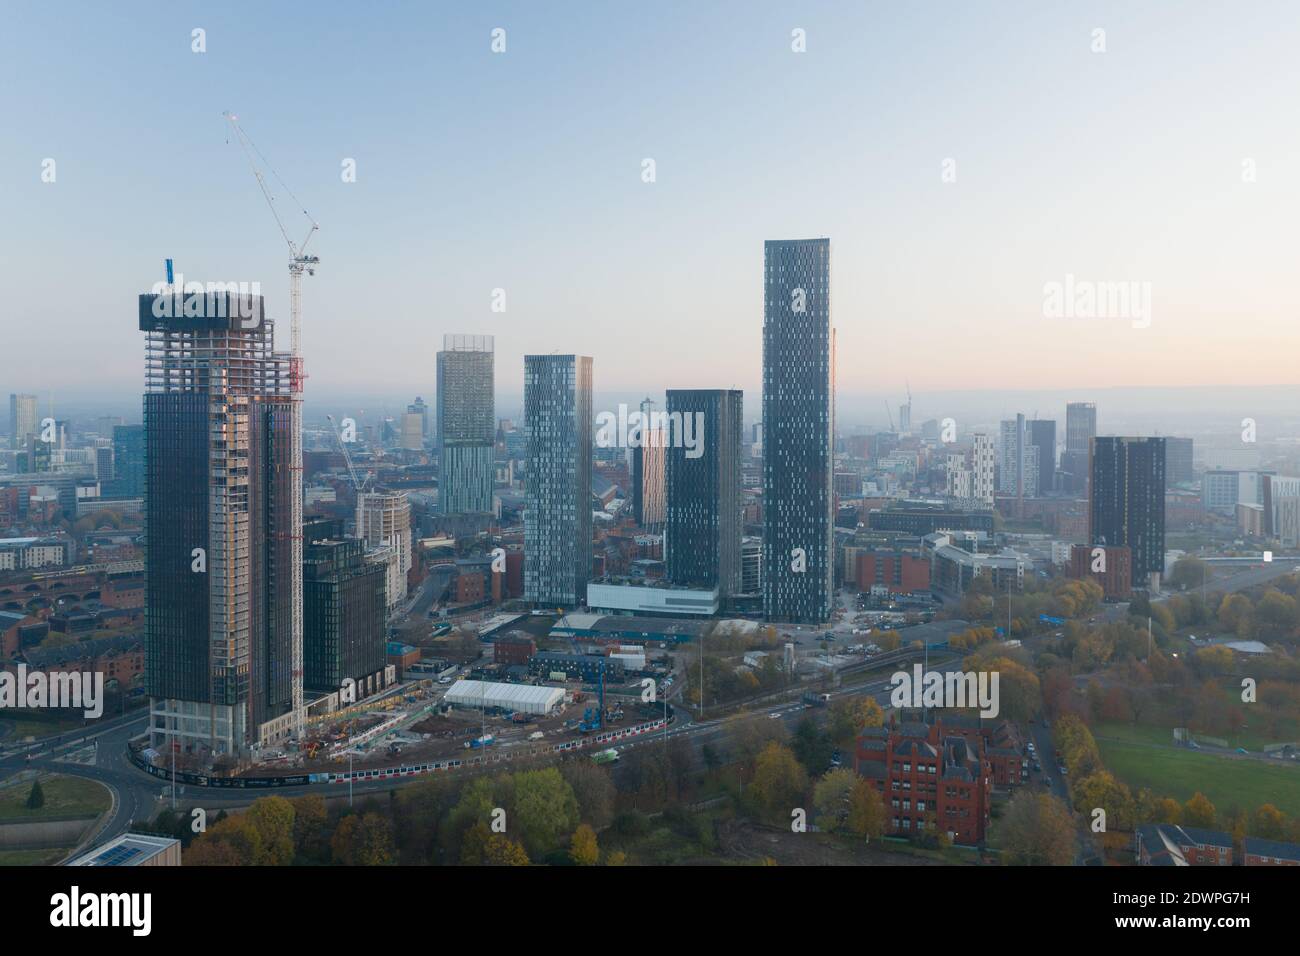 Aerial View of Manchester, Deansgate Towers, Hulme, Stock Photo